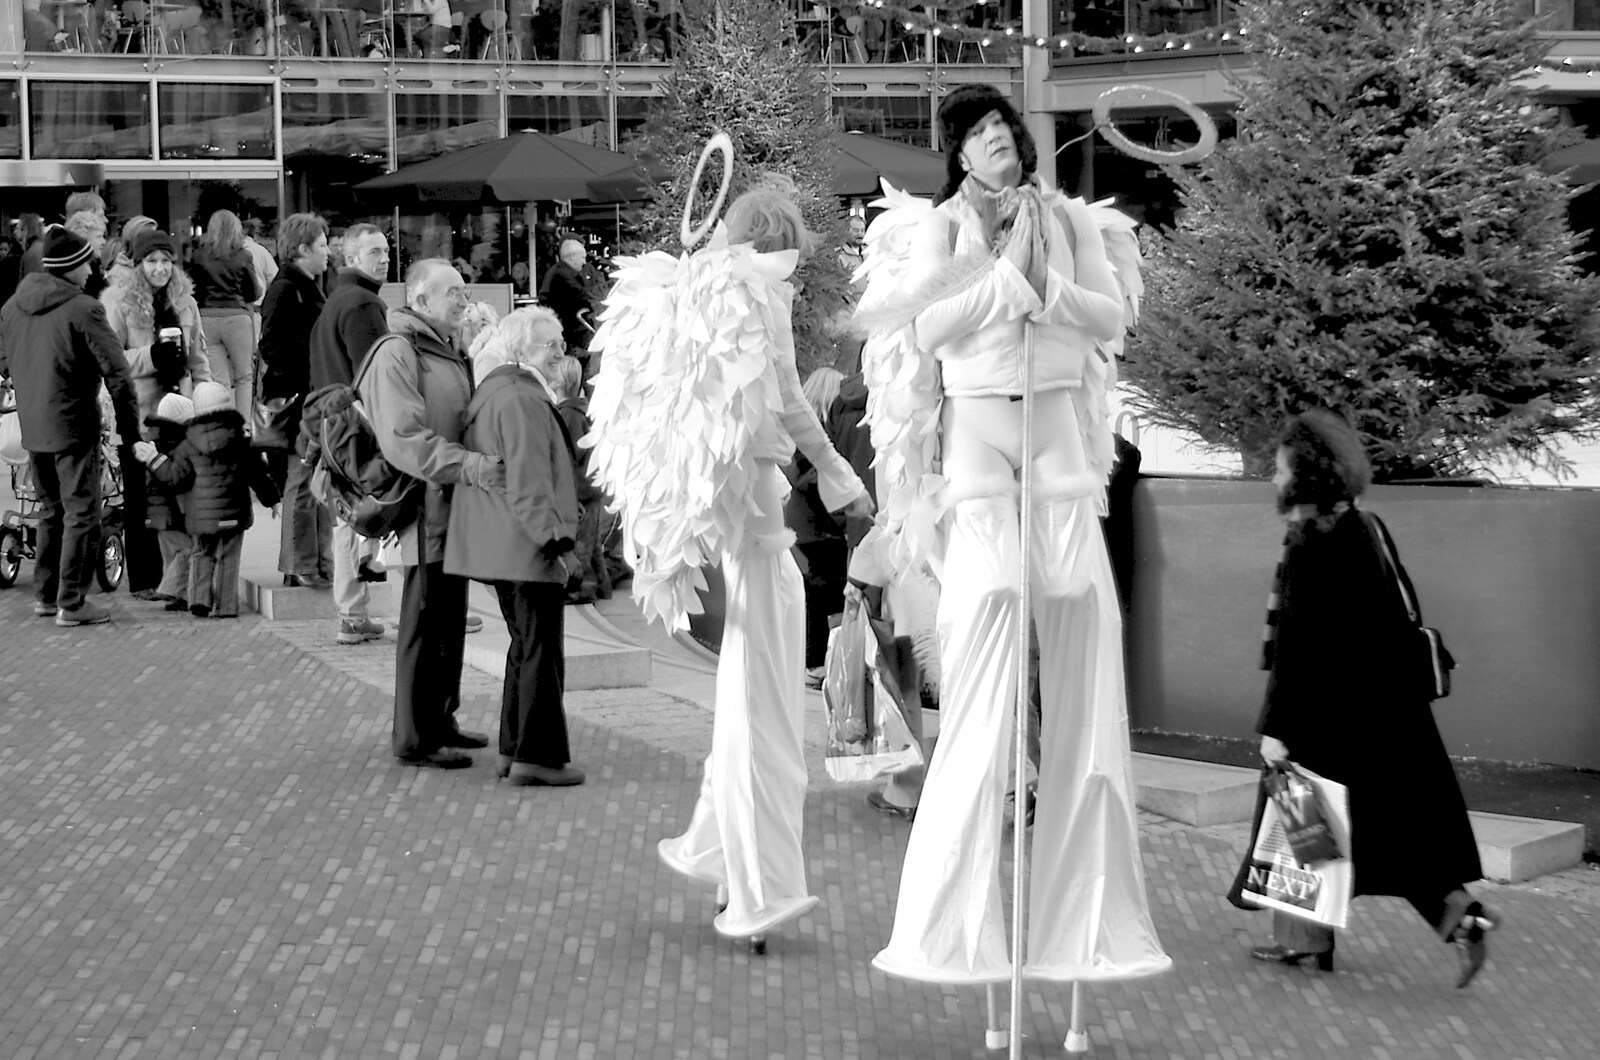 Another prayer from a stilted angel from Christmas Shopping and a Carol Service, Norwich and Thrandeston - 19th December 2004